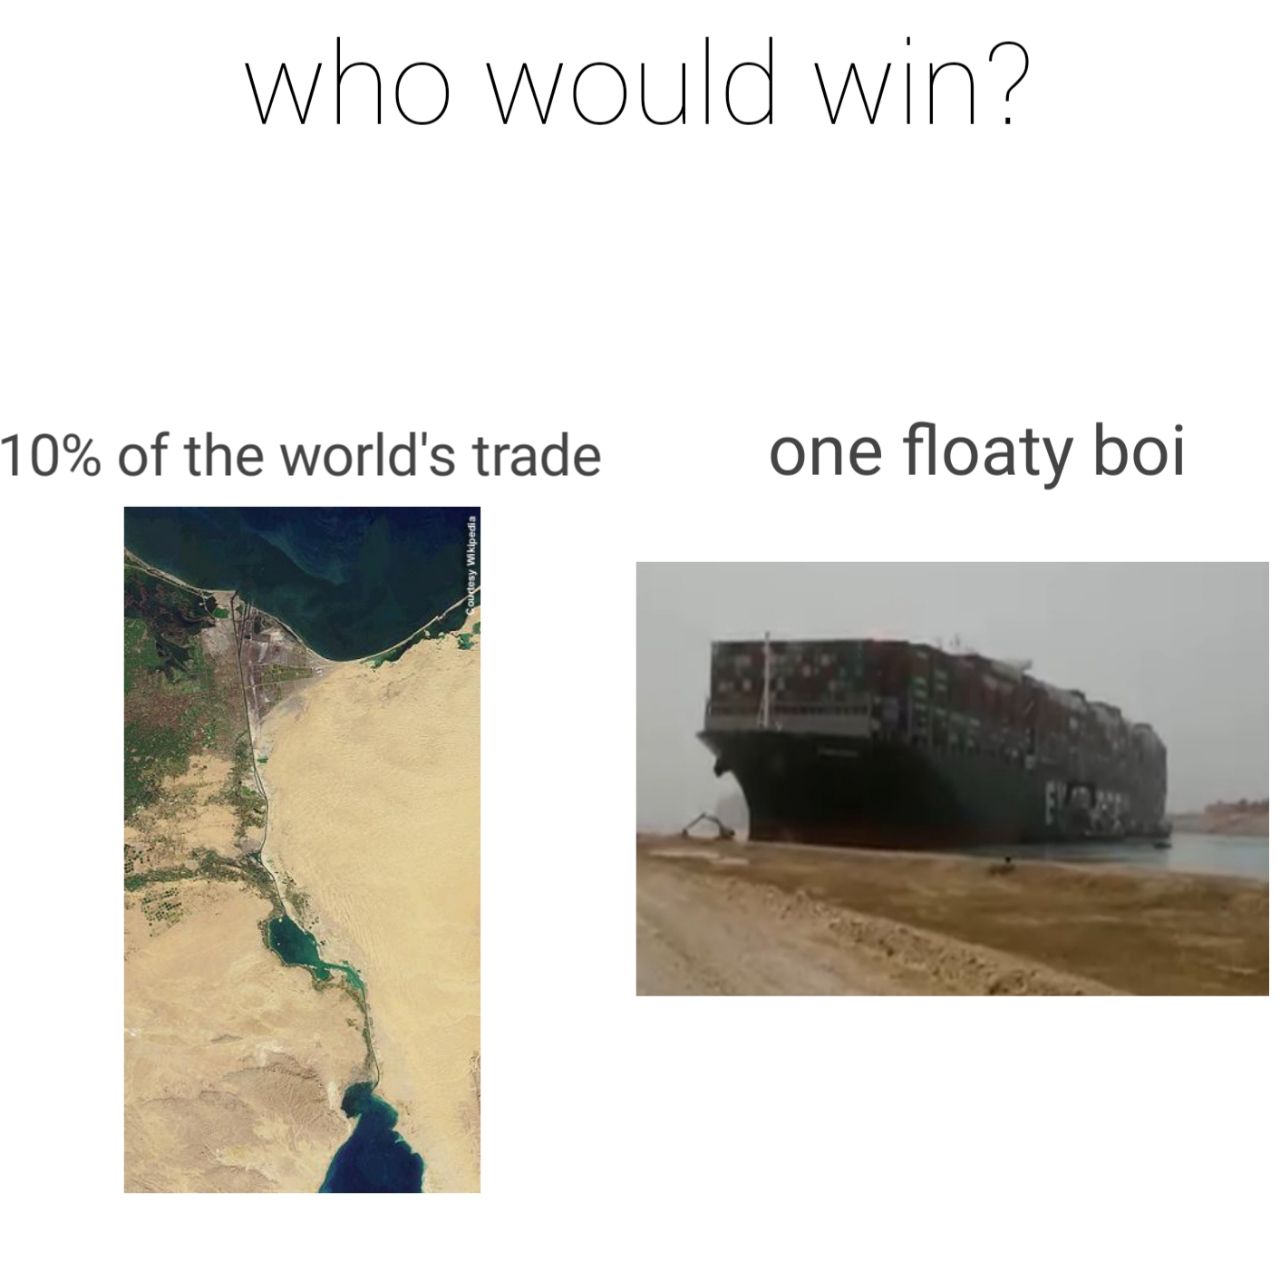 The floaty boi did it